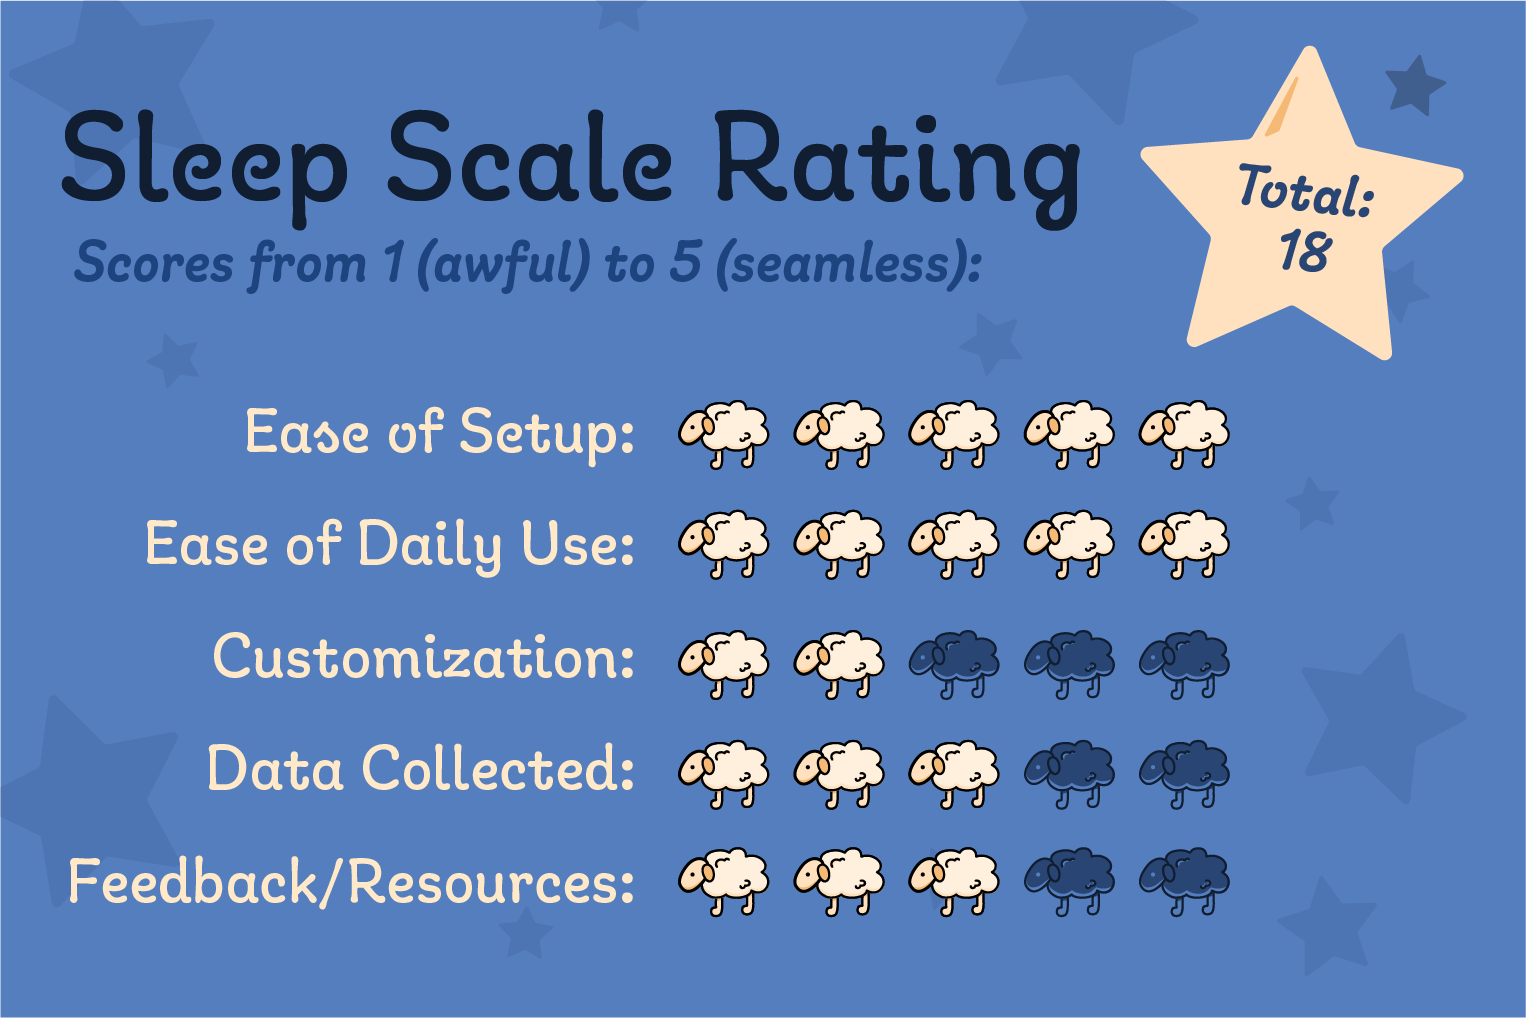 Scores from 1 (awful) to 5 (seamless):<br />
Ease of setup: 5<br />
Ease of daily use: 5<br />
Customization: 2<br />
Data collected: 3<br />
Feedback and resources: 3<br />
Total: 18